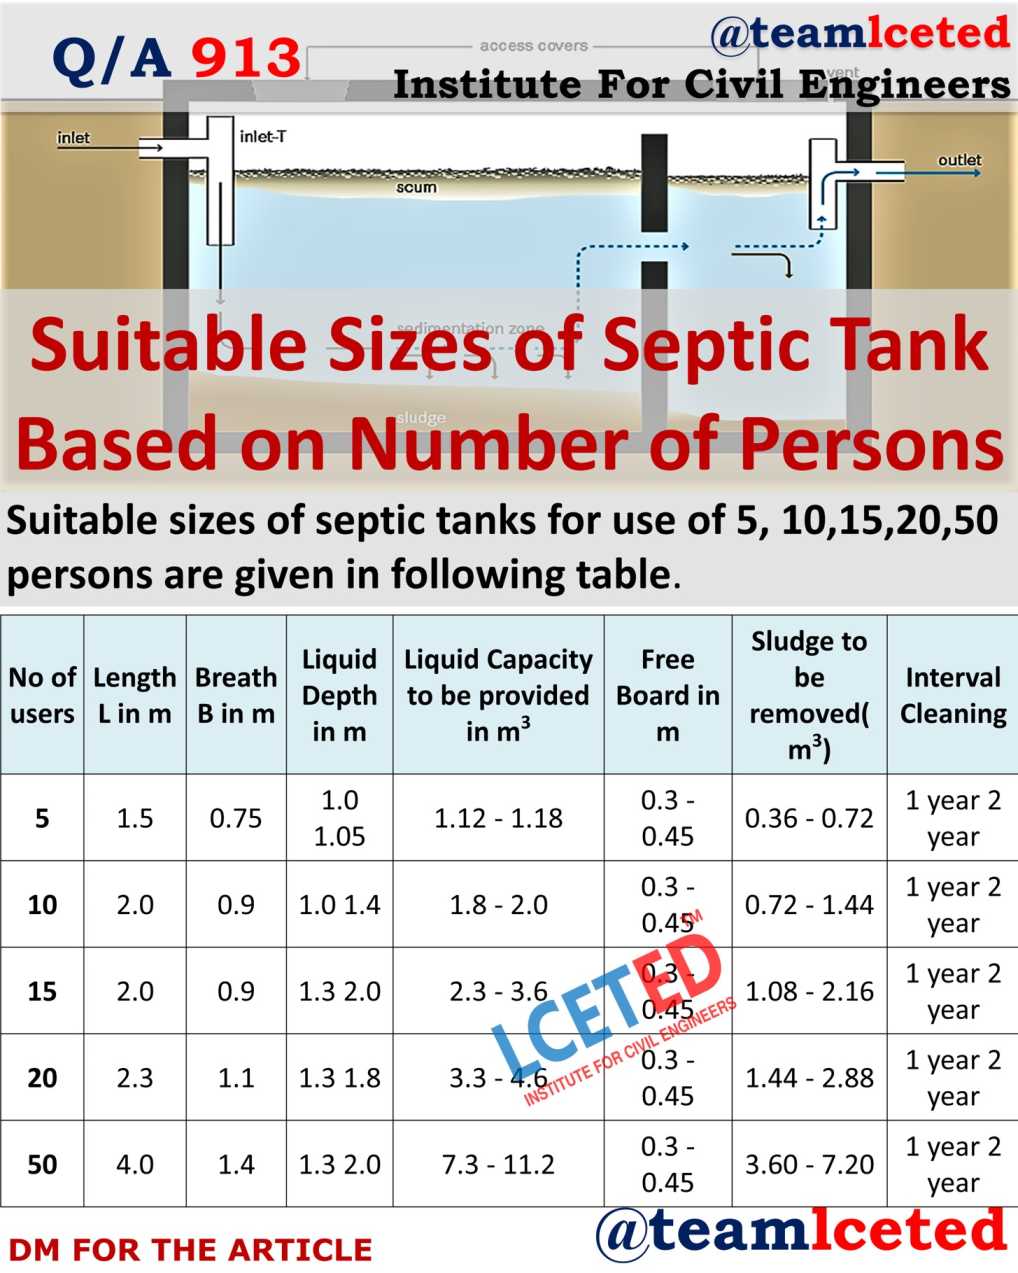 Sizes of Septic Tank Based on Number of Persons